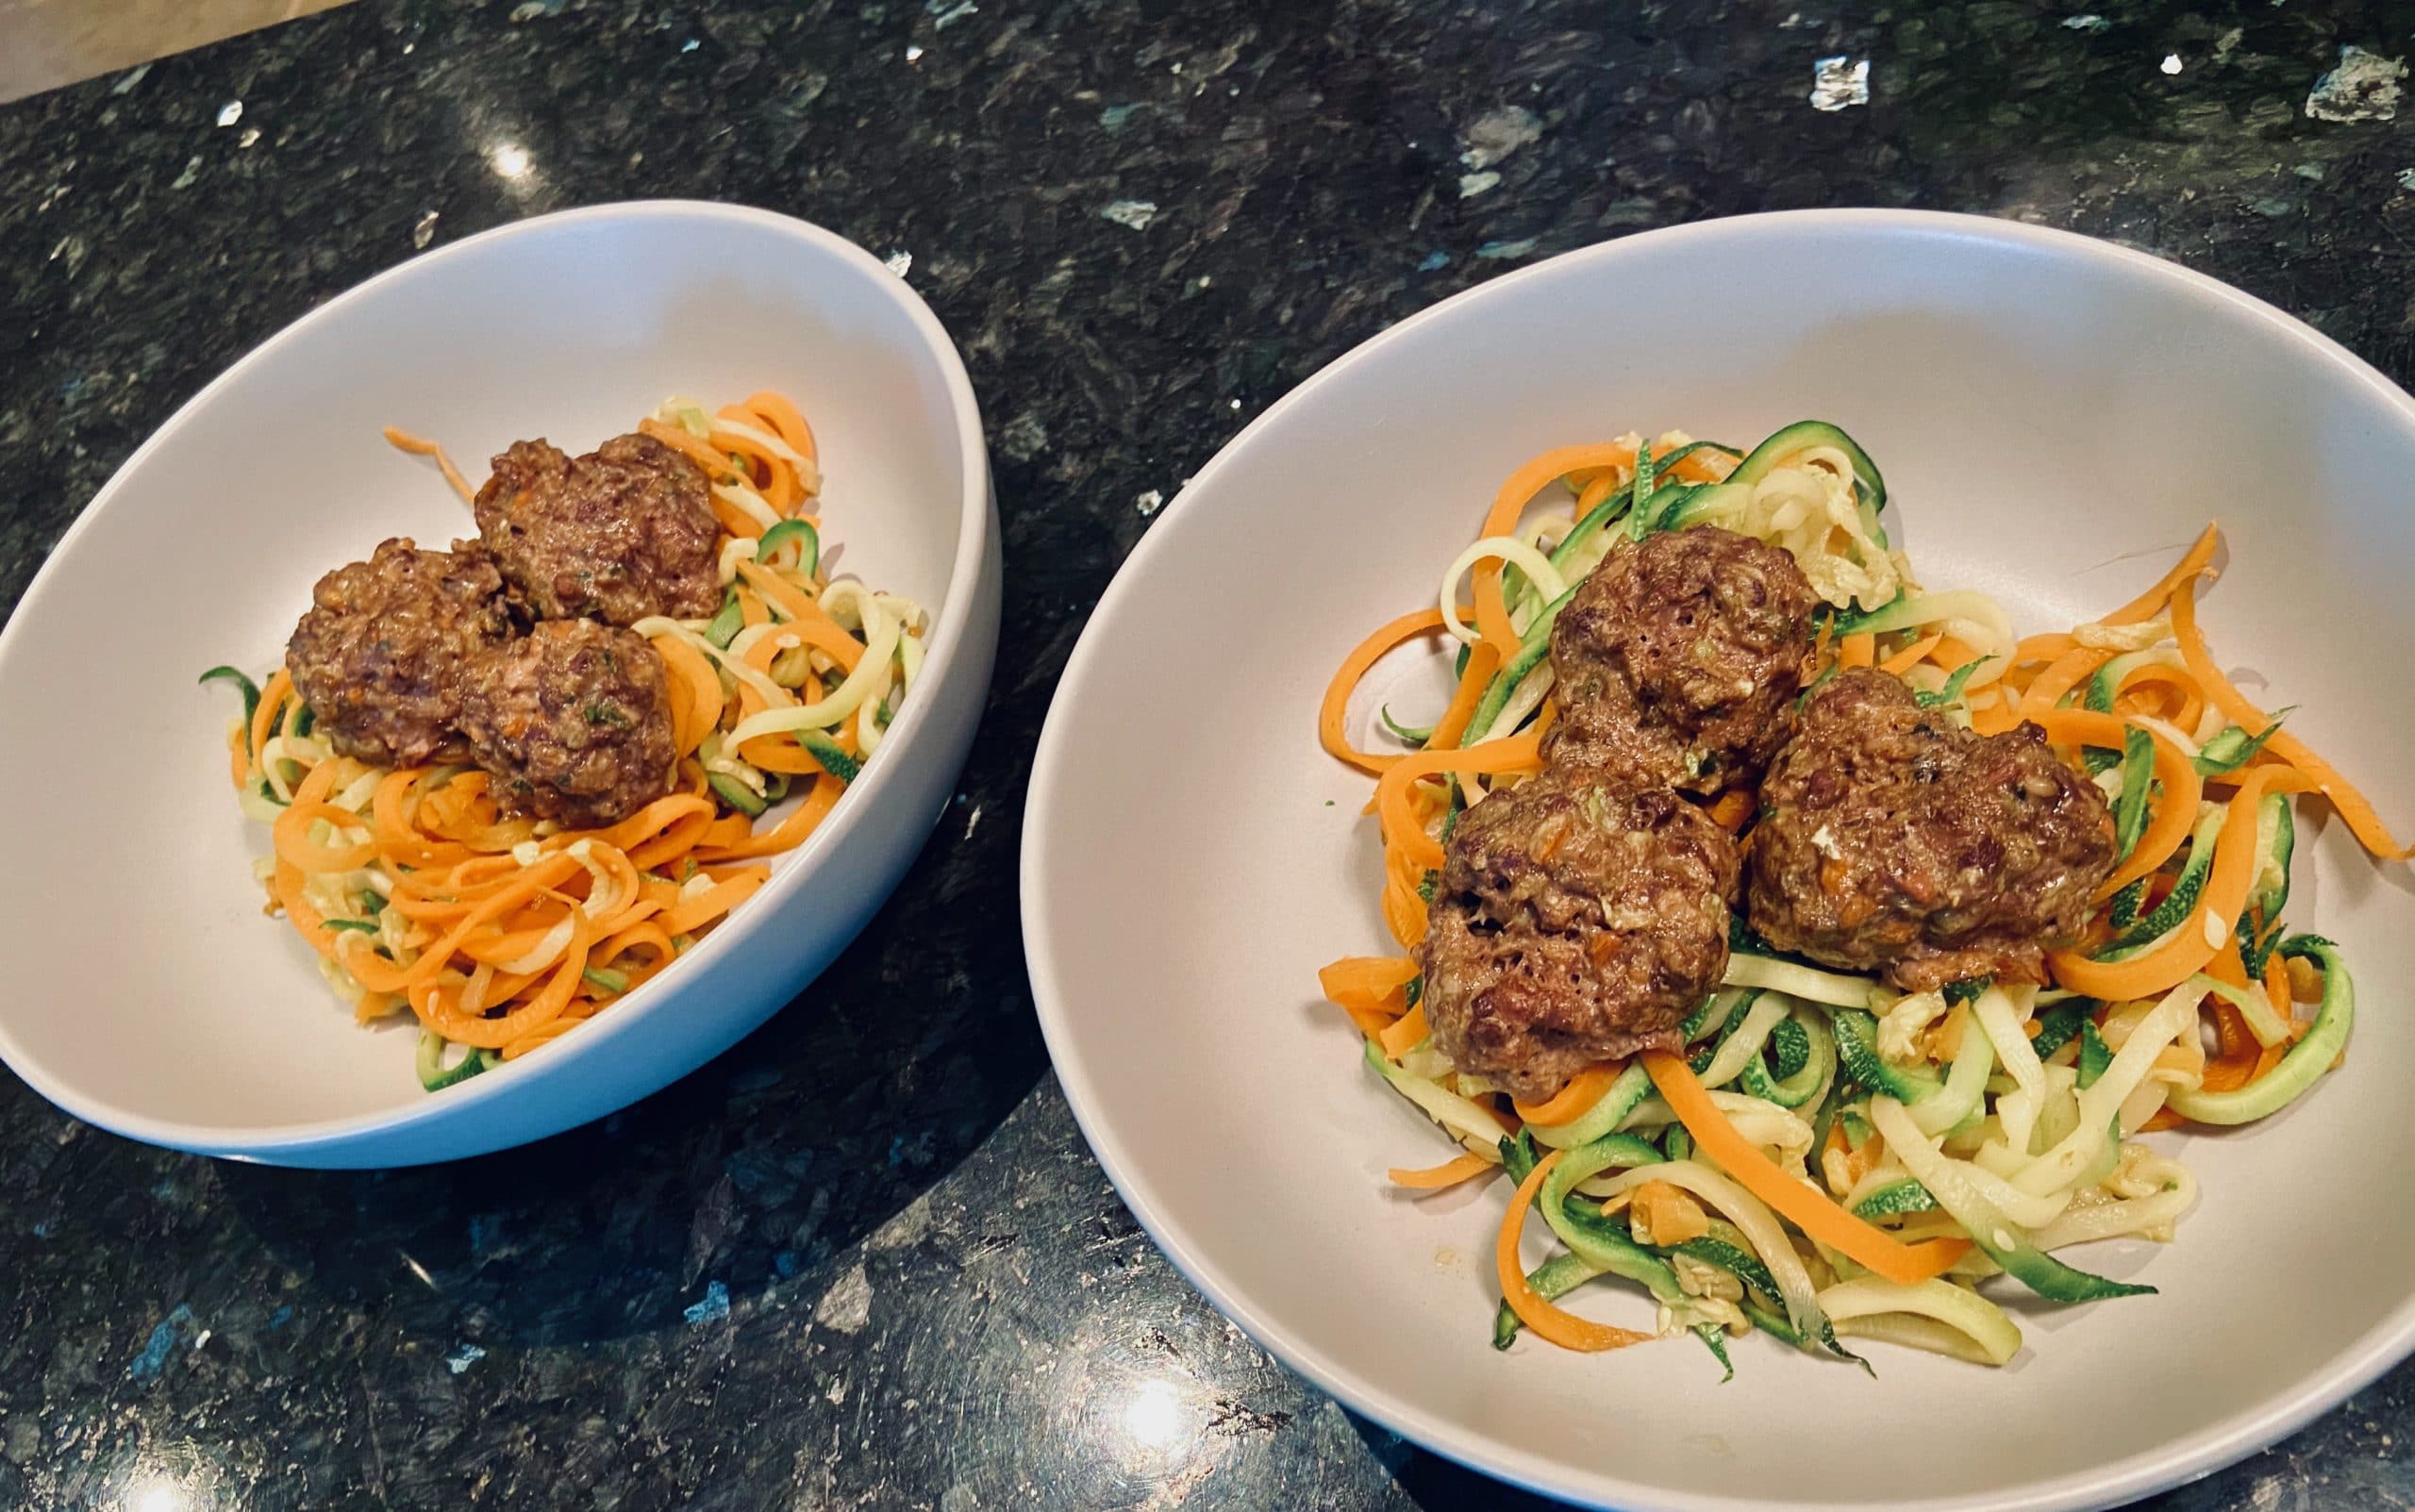 Meatballs and spaghetti for dogs